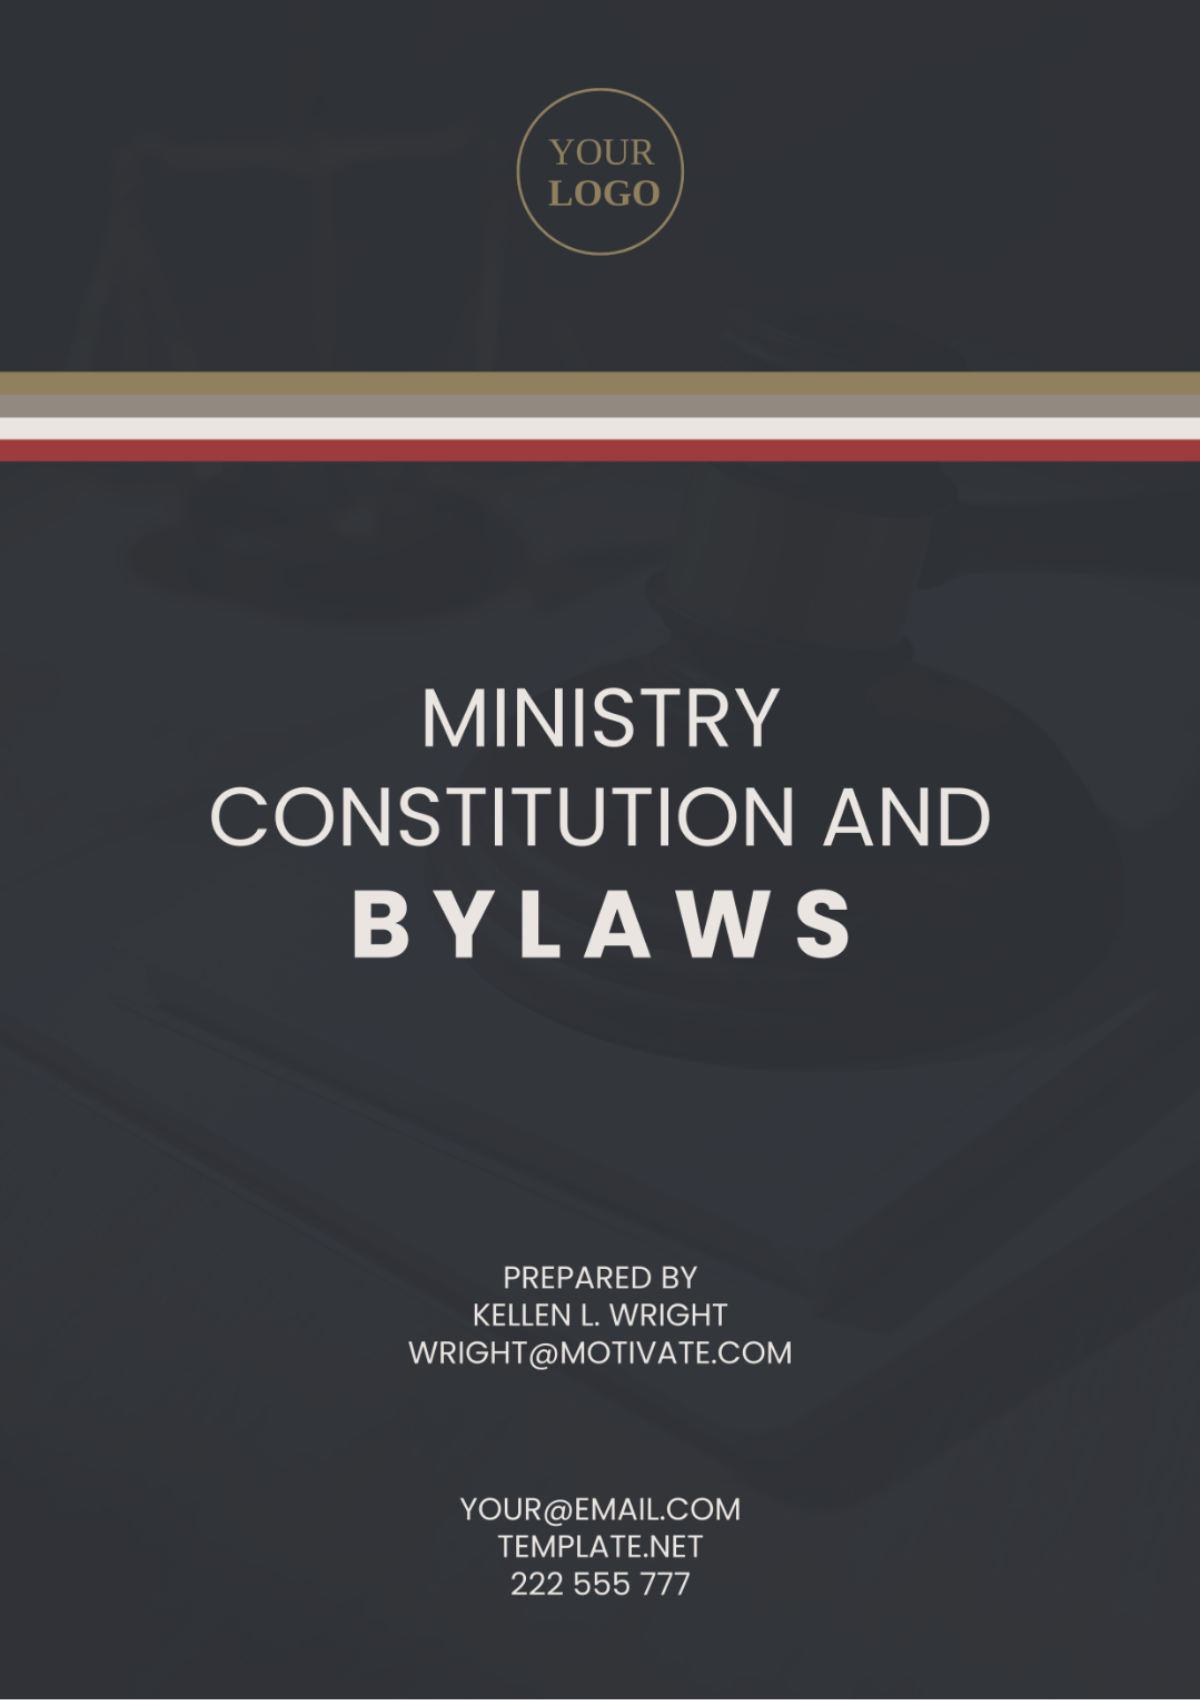 Ministry Constitution And Bylaws Template